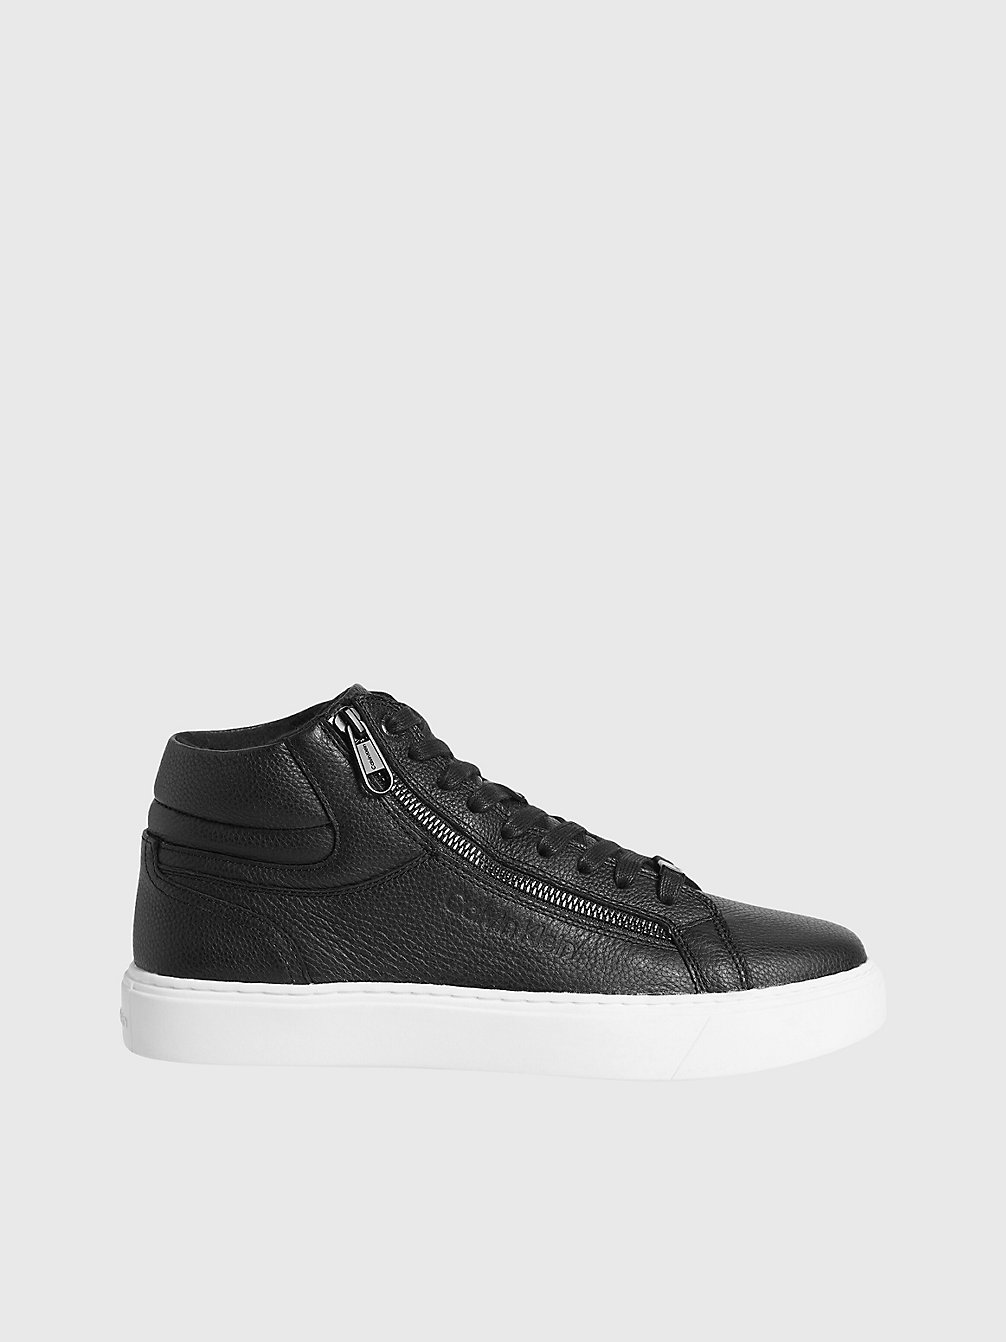 PVH BLACK Leather High-Top Trainers undefined men Calvin Klein